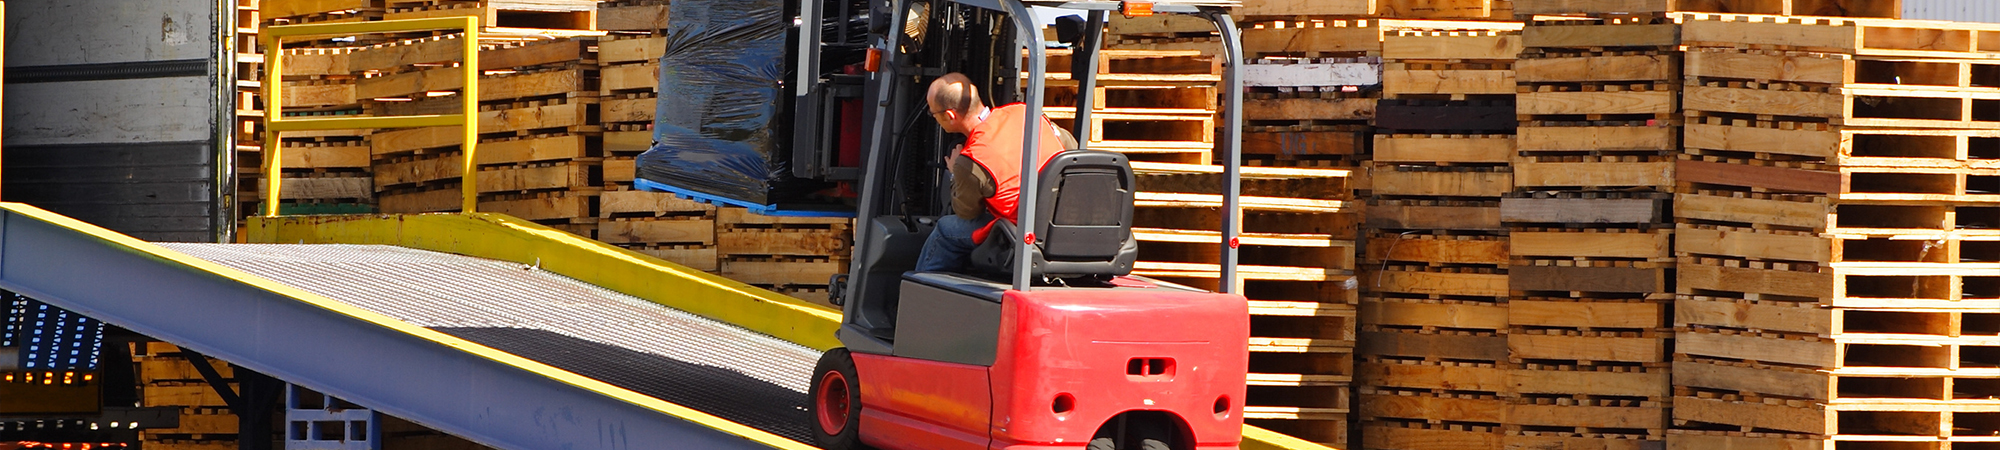 Forklift Going Into Truck